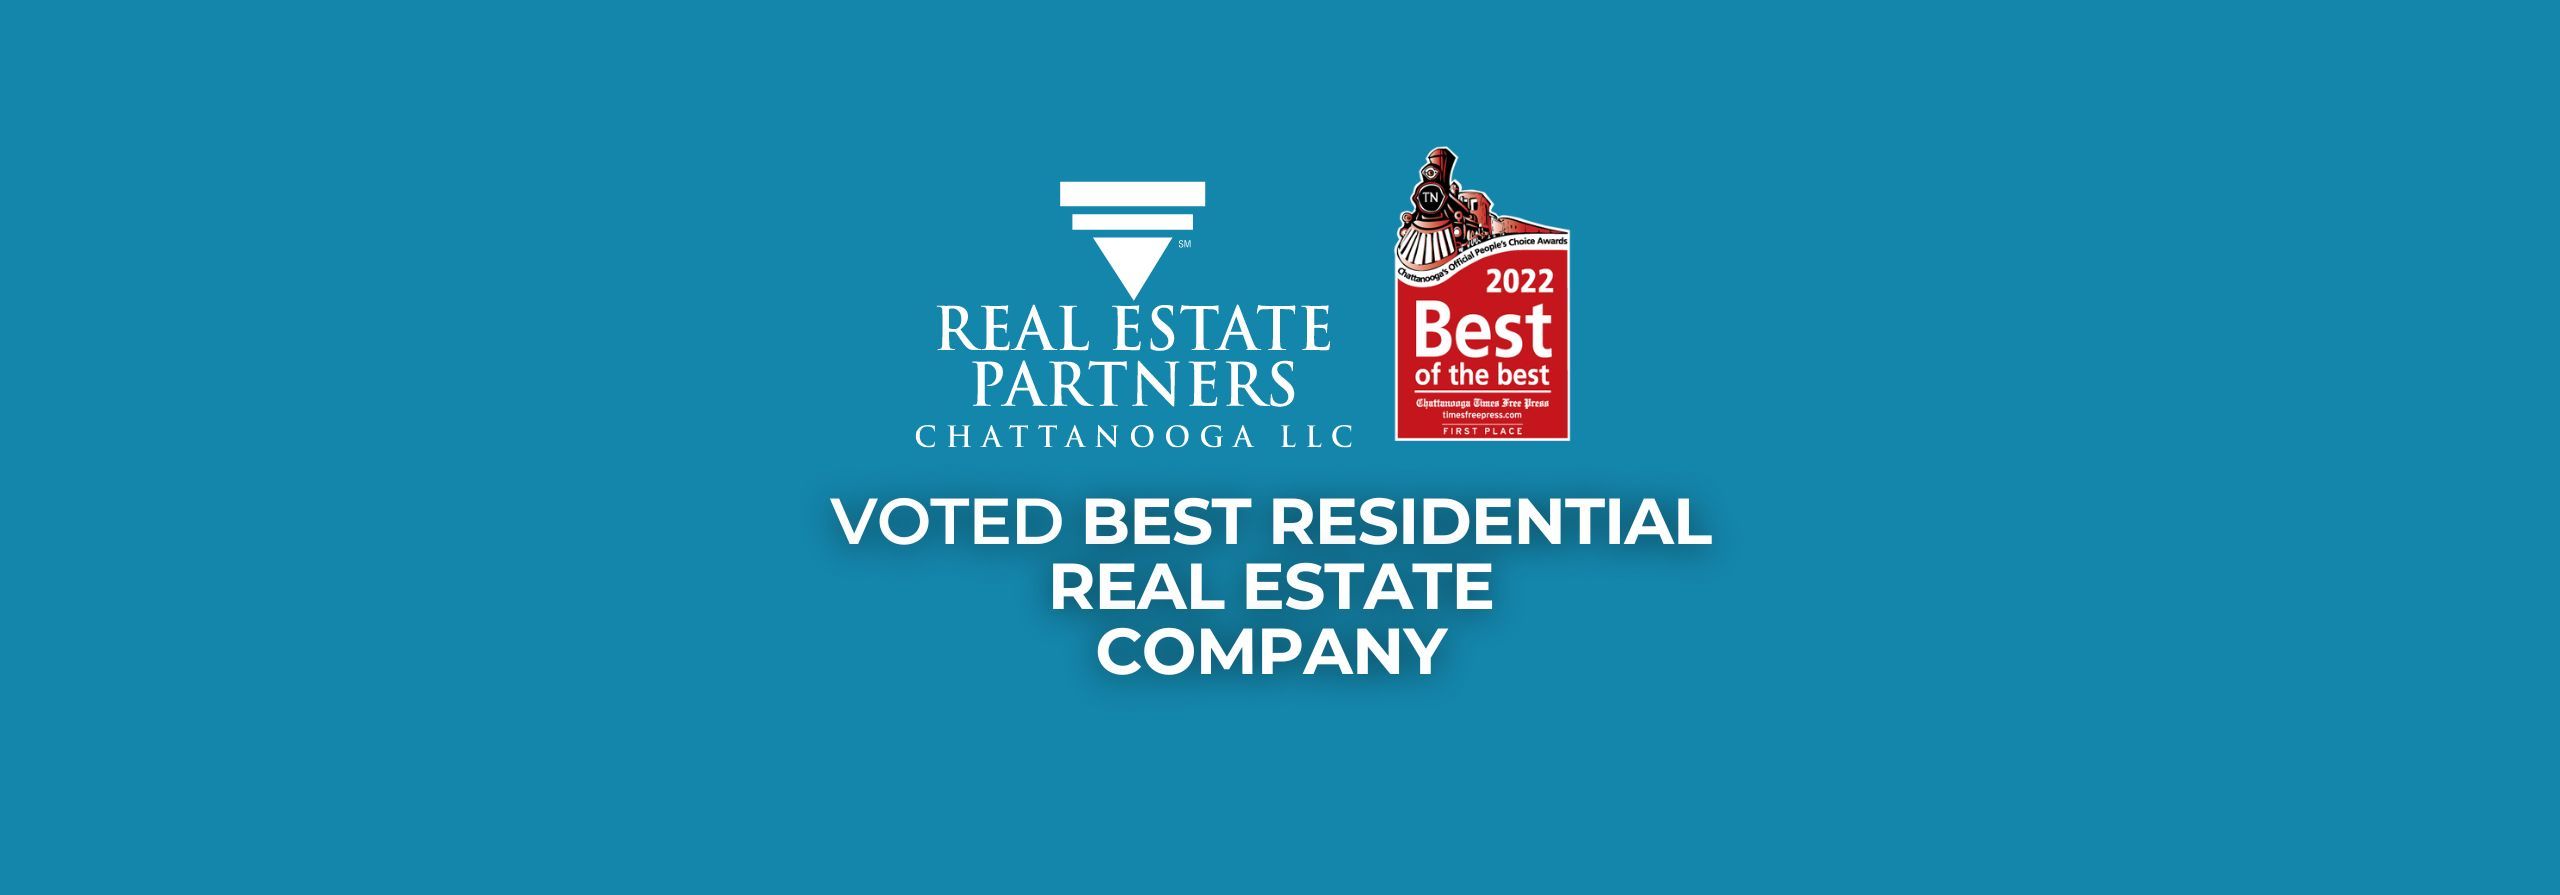 Real Estate Partners Chattanooga wins Best Residential Real Estate Company For Second Year In a Row